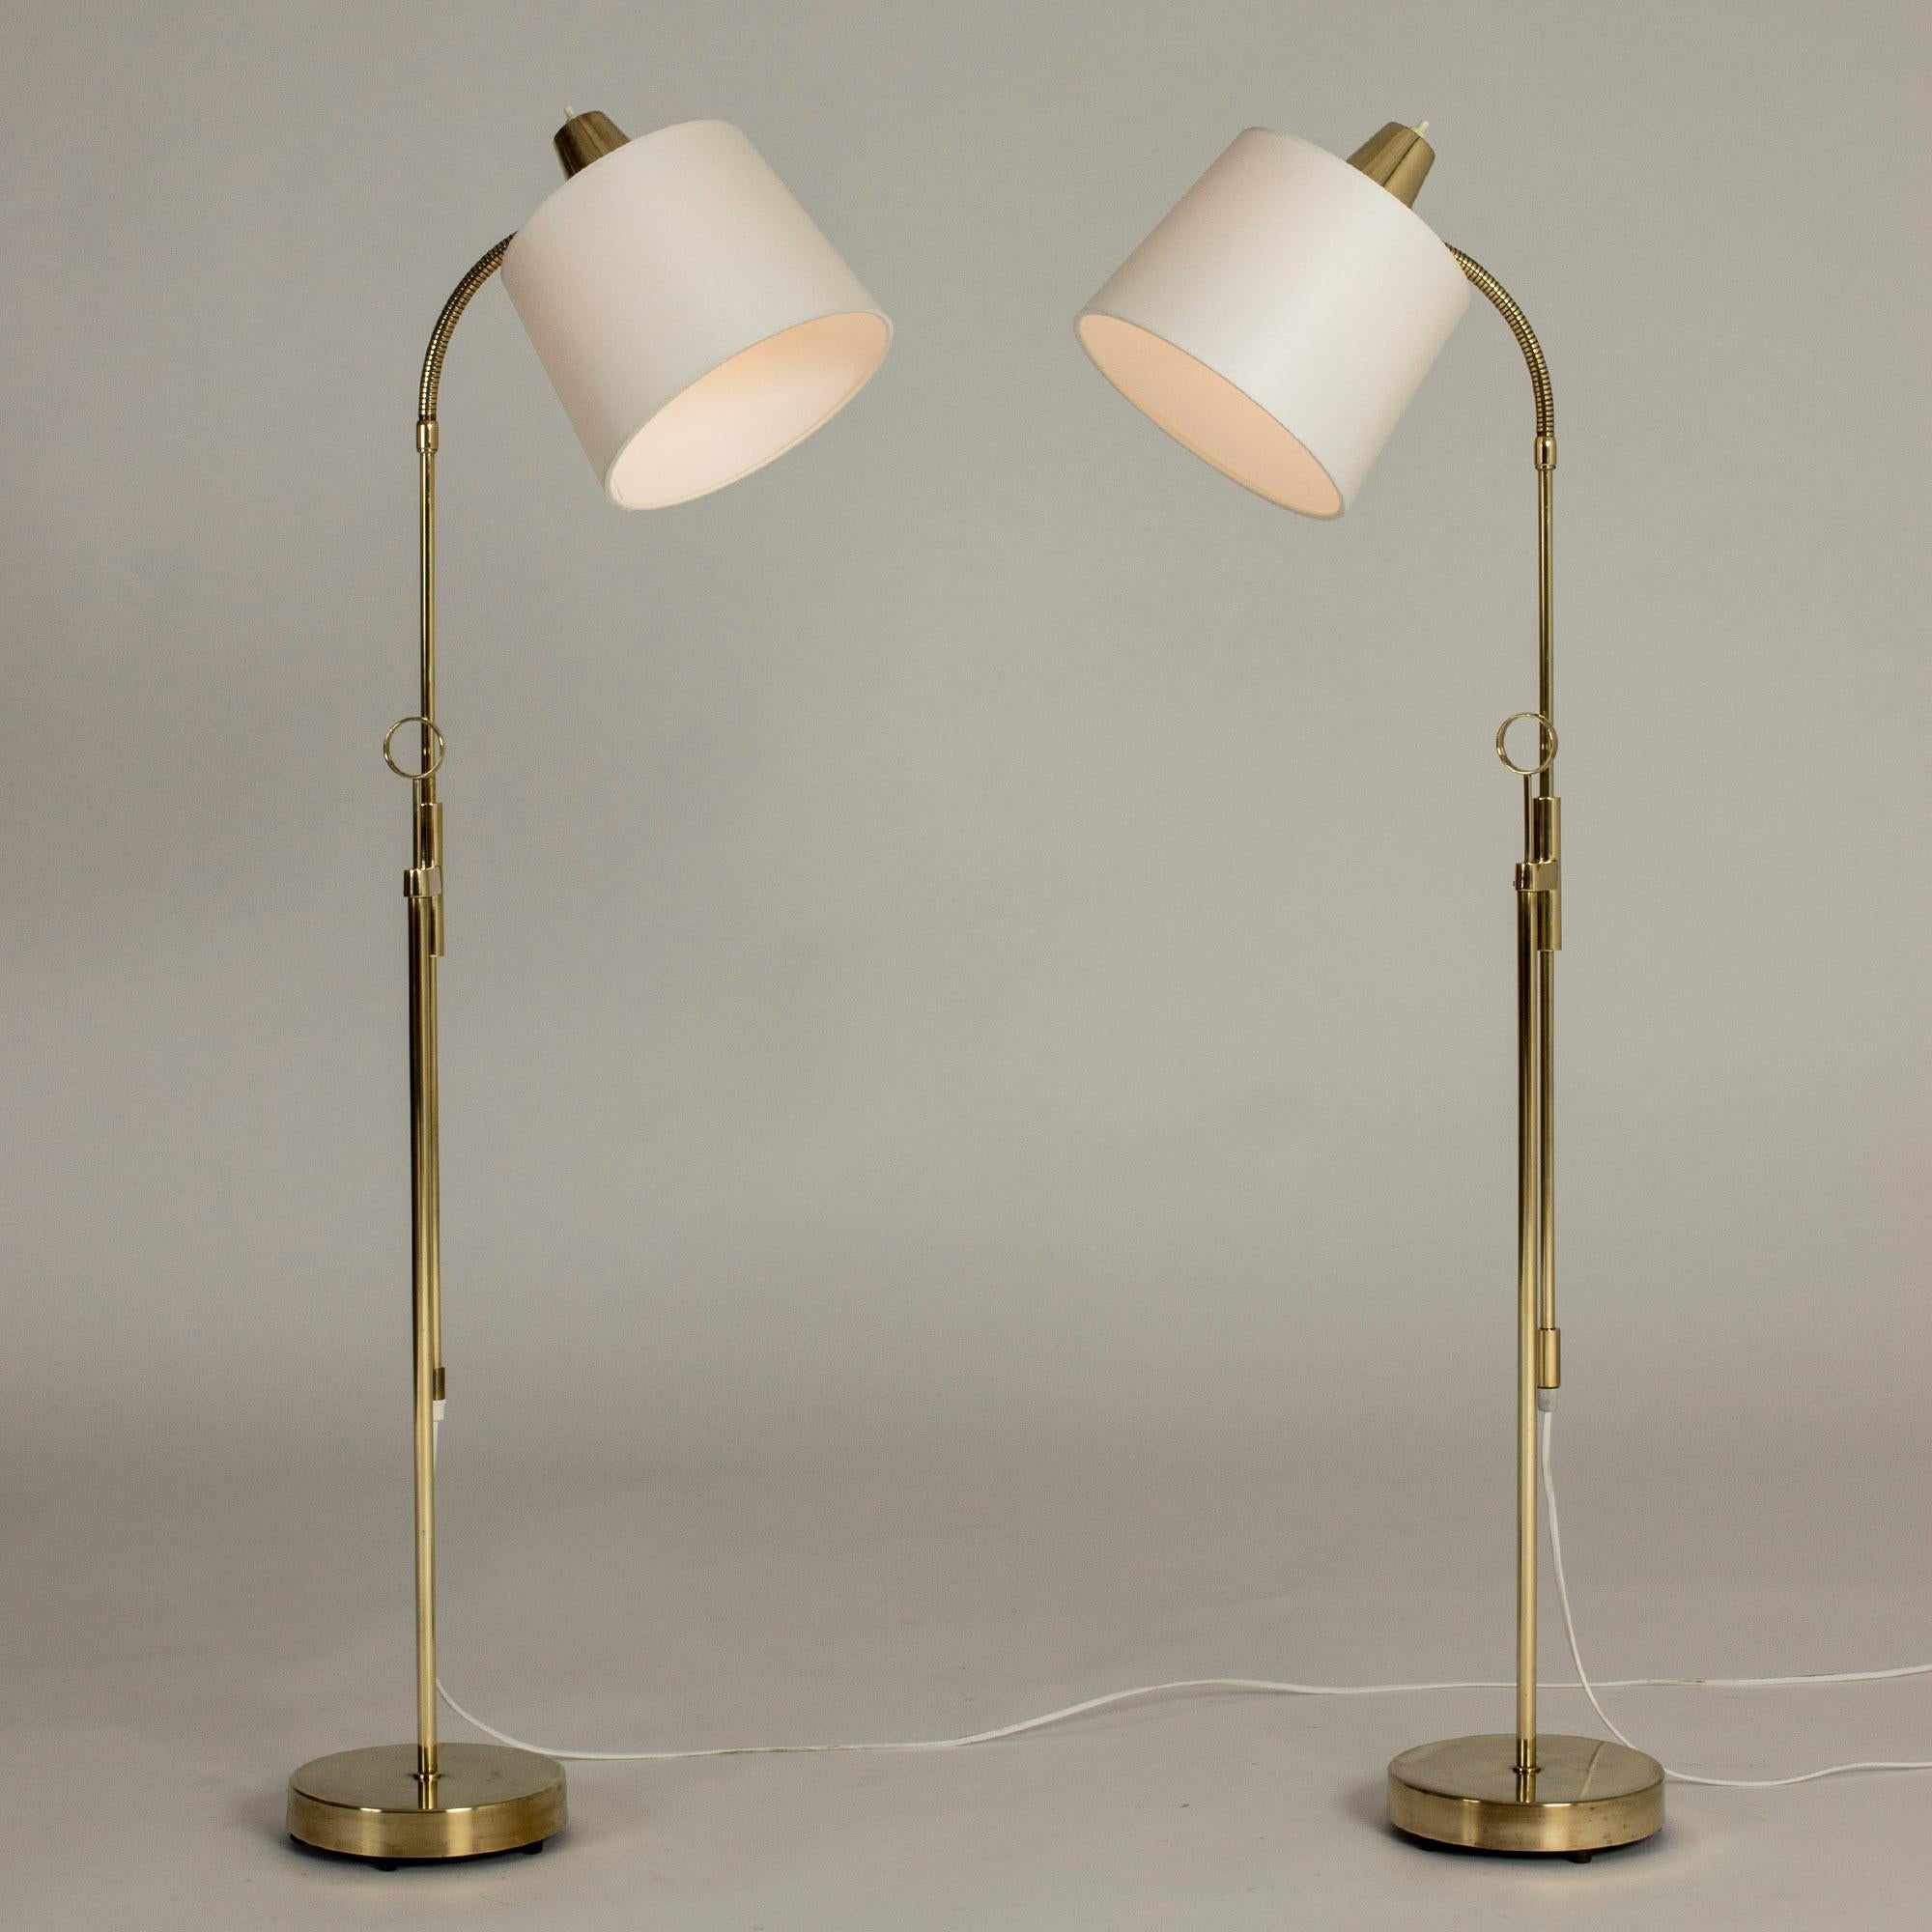 Pair of elegant brass floor lamps from Falkenbergs Belysning, with adjustable height. Hoops on the stems make a decorative detail as well as having a practical use.